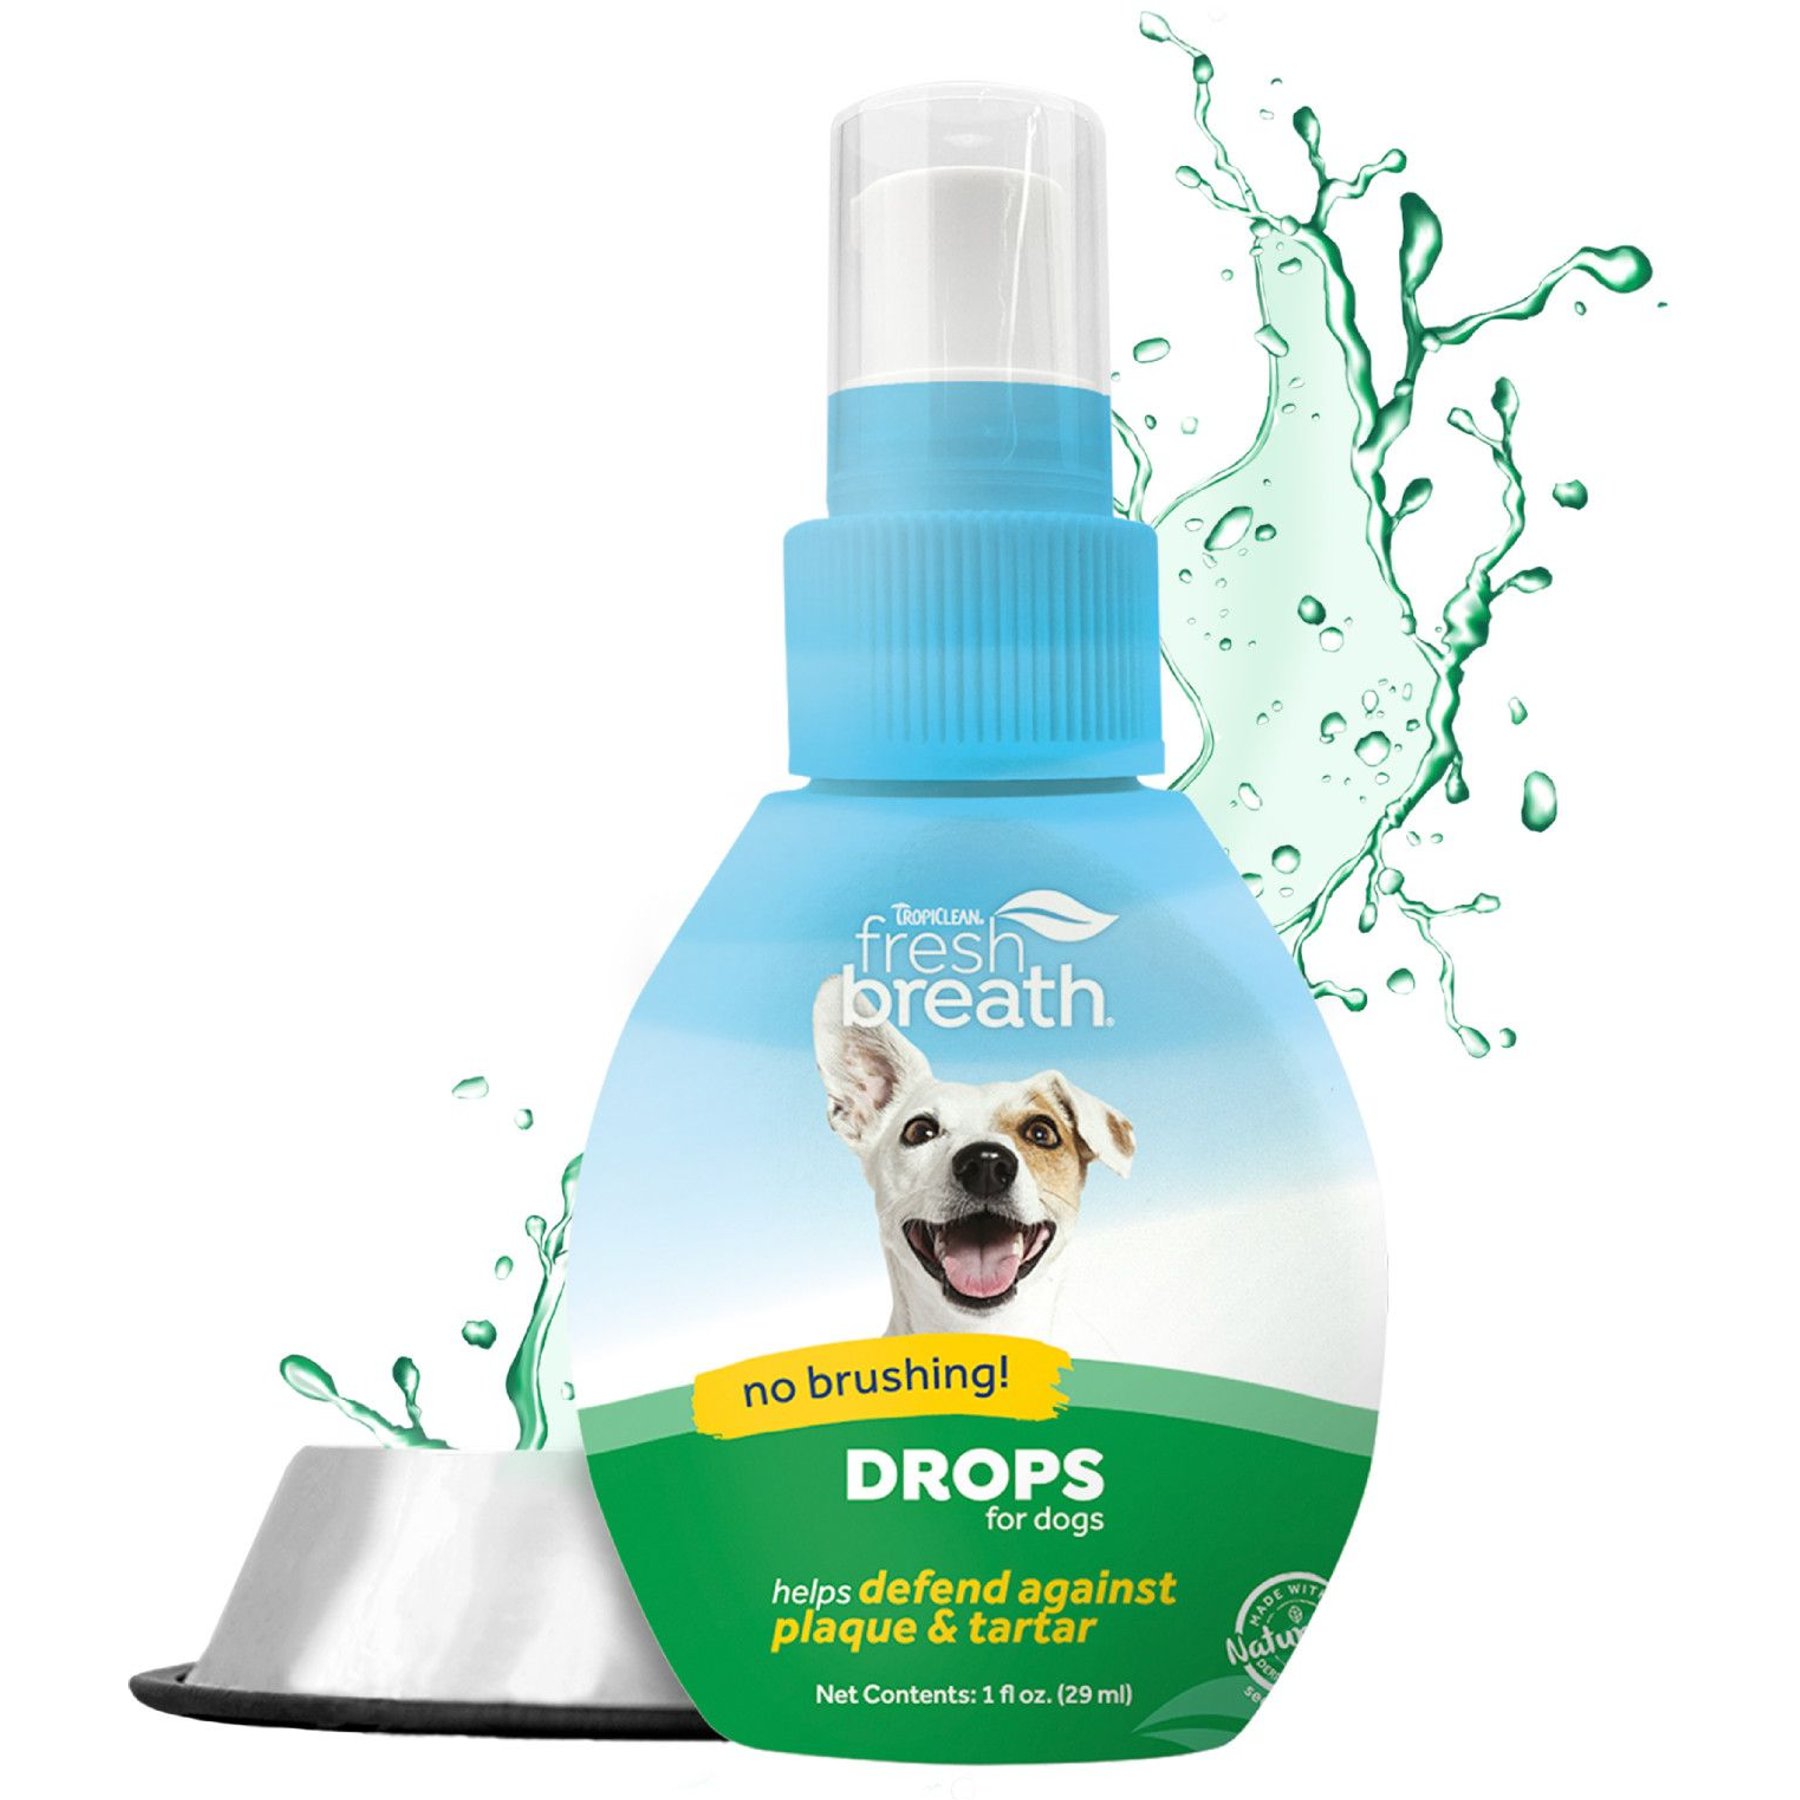 TropiClean OxyMed Ear Cleaner for Dogs and Cats - TropiClean Pet Products  for Dogs and Cats